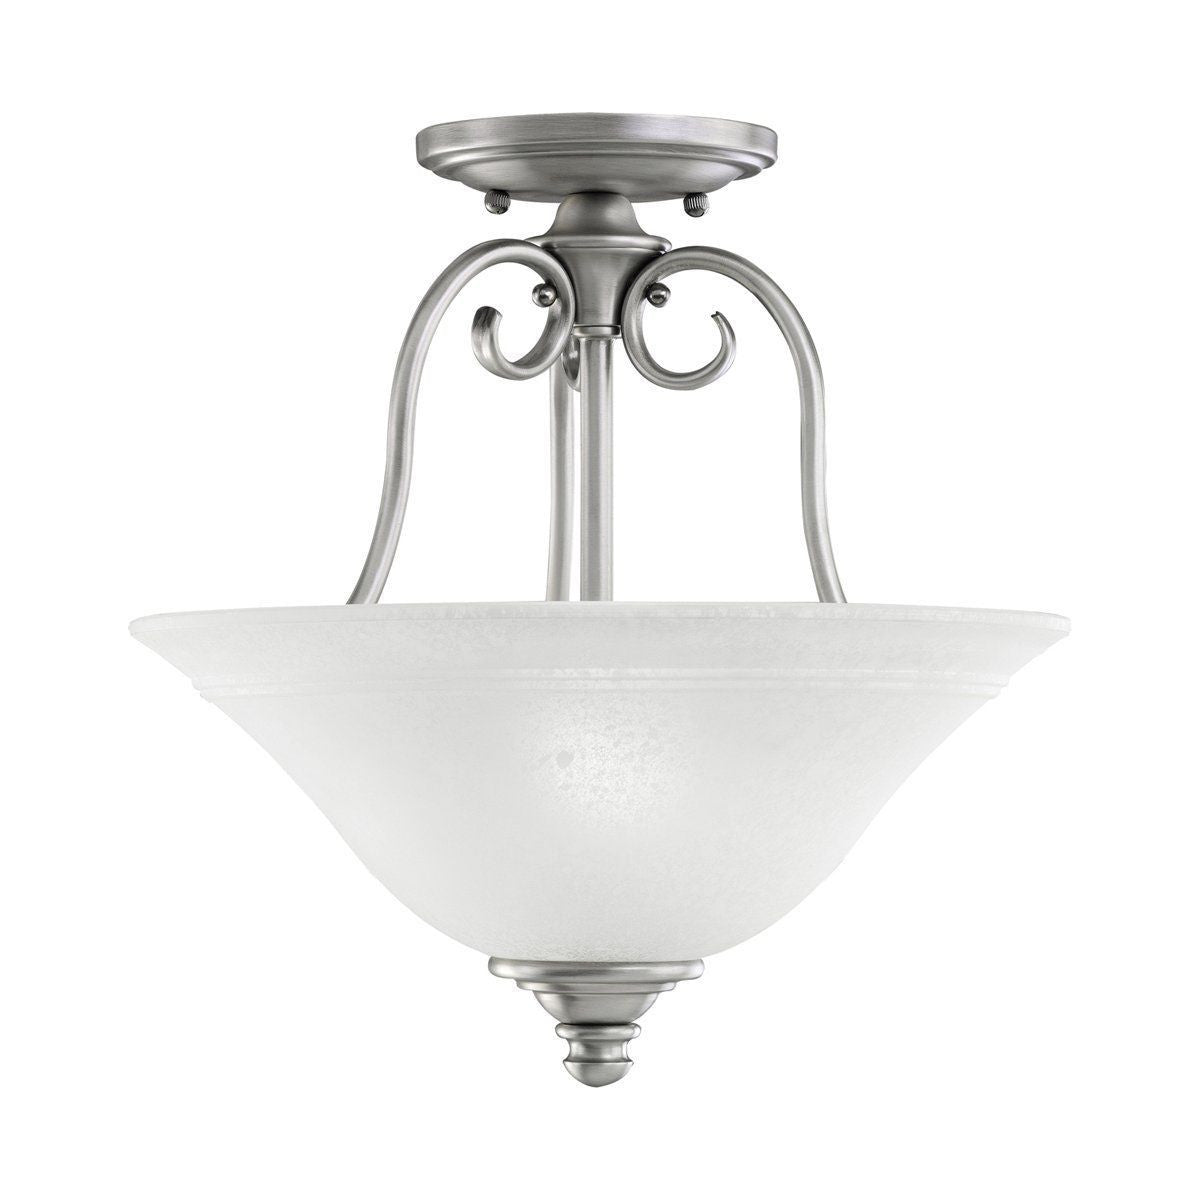 Aztec by Kichler Lighting 38907 Two Light Northampton Collection Semi Flush Ceiling Fixture in Antique Pewter Finish